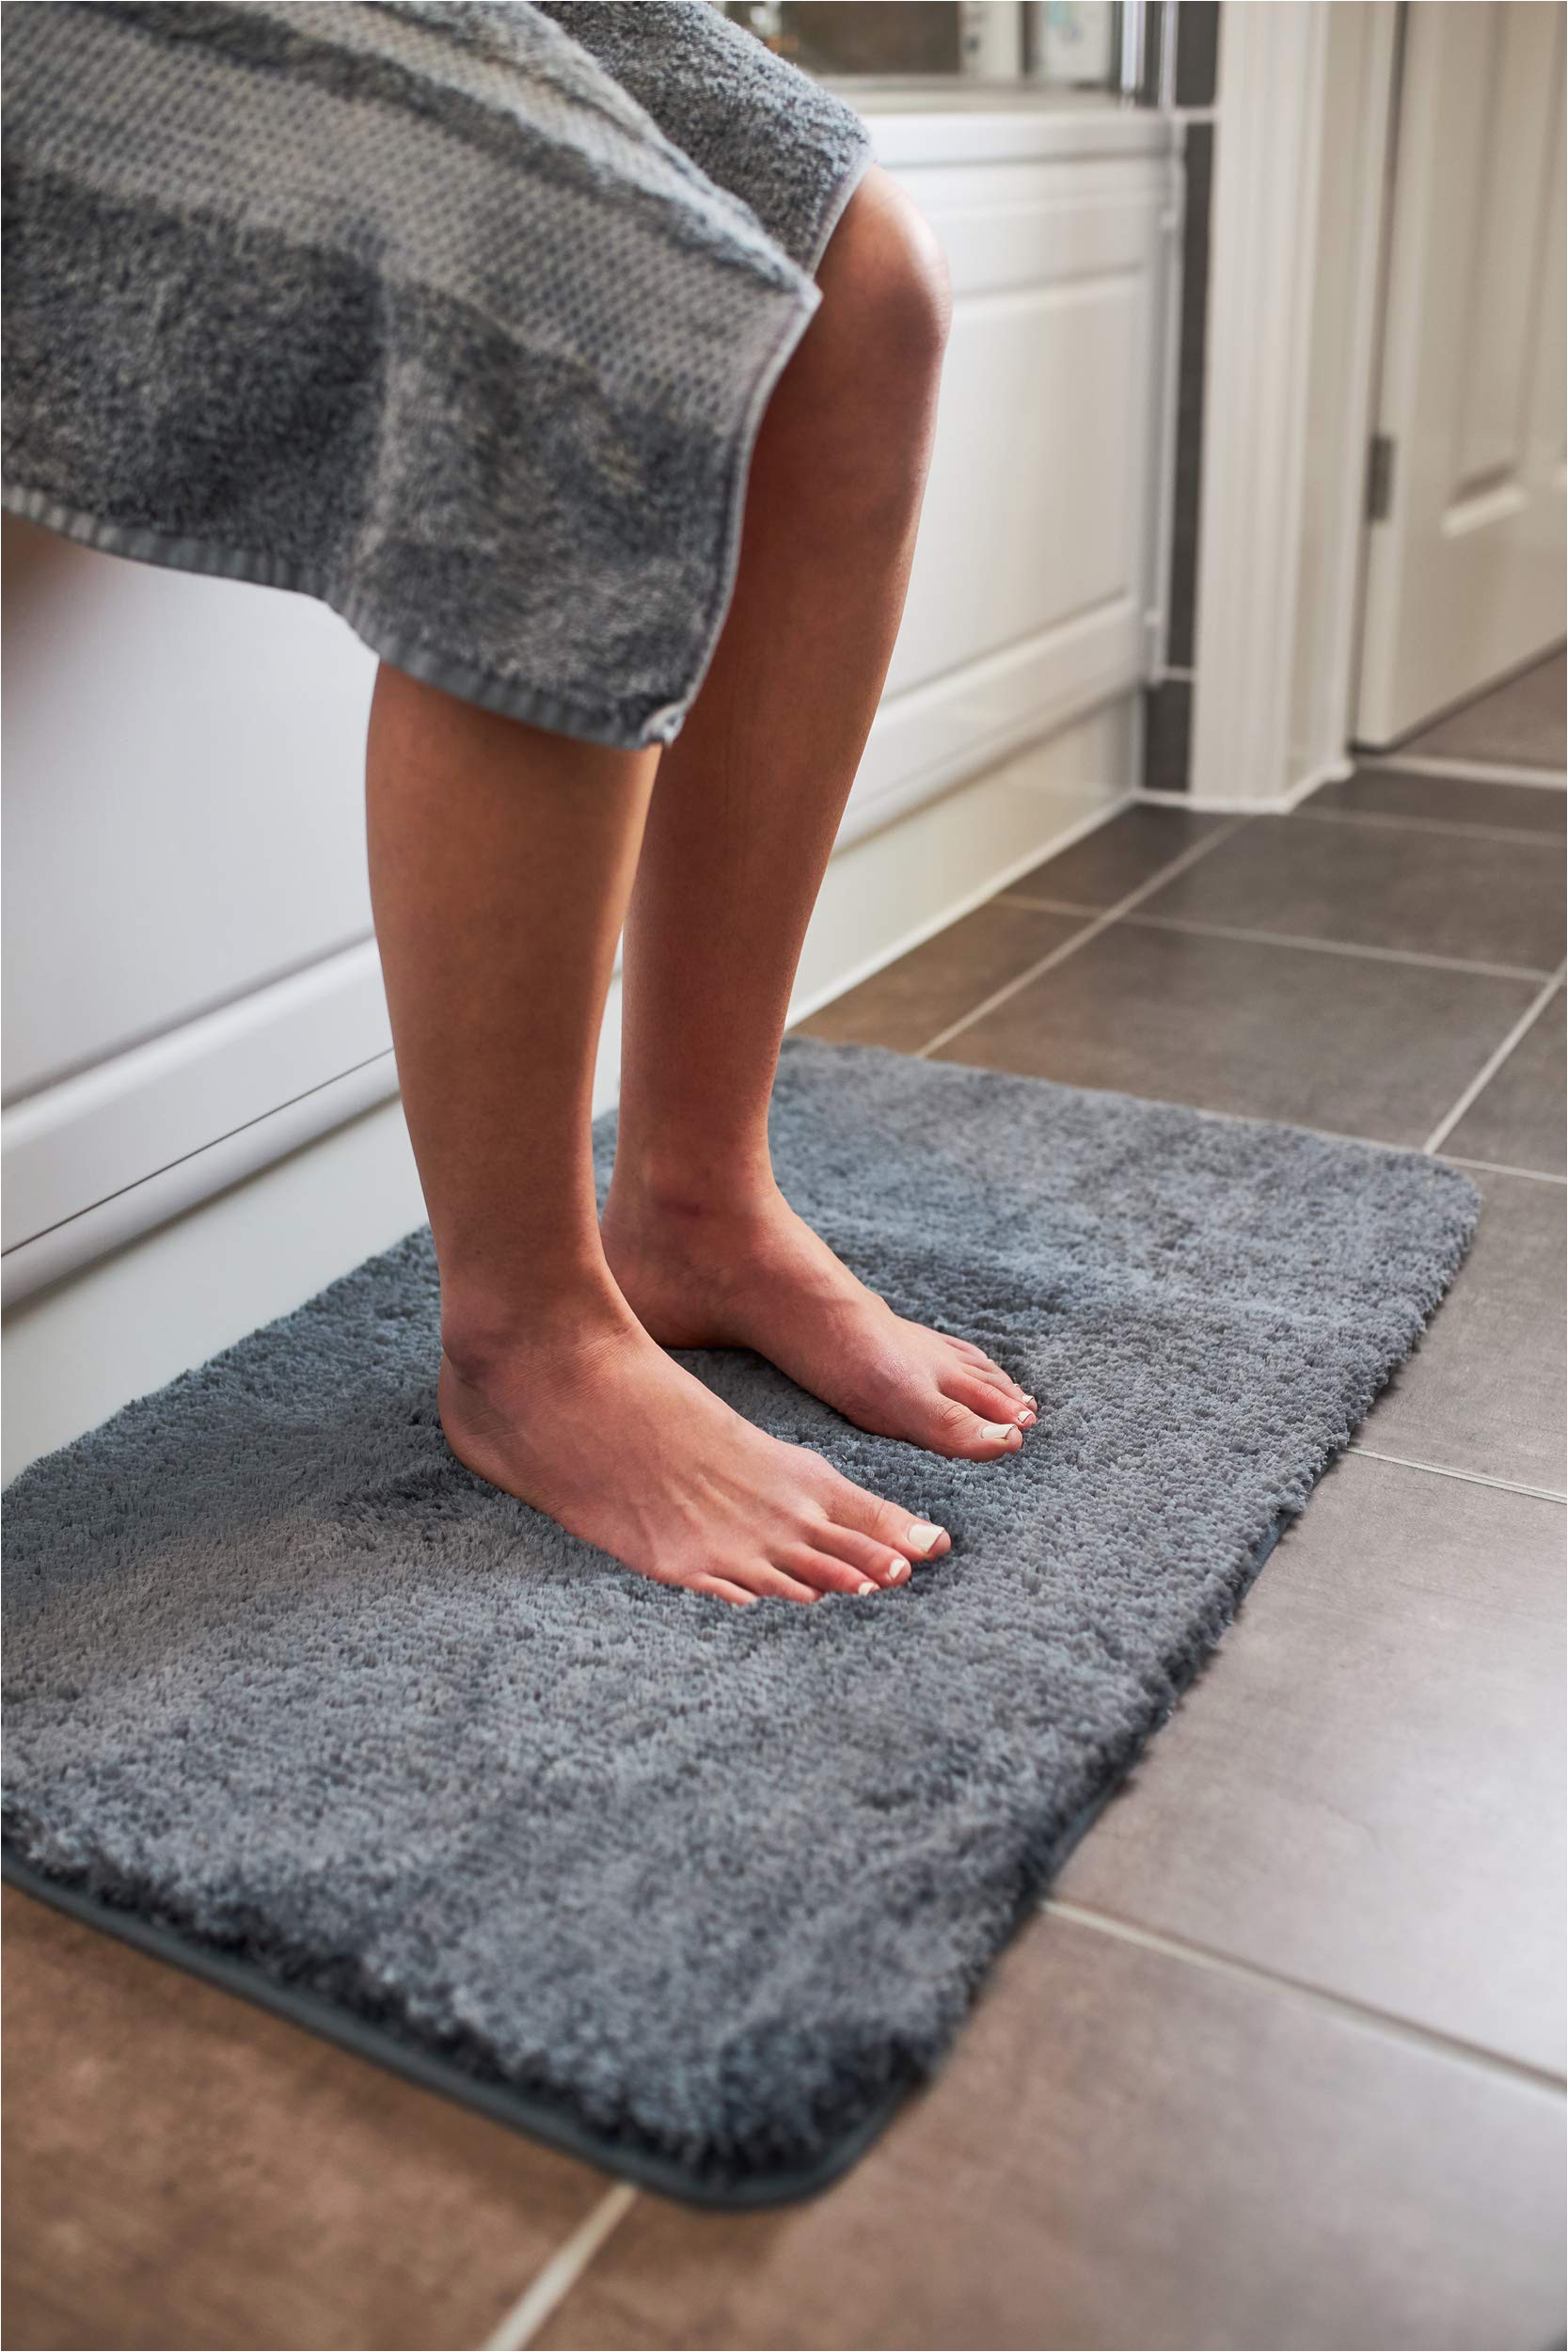 Quick Dry Bathroom Rugs Luxury Grey Bath Mat Microfiber Non Slip Bath Rug with Super soft Absorbent Dry Fast Design for Bath and Shower